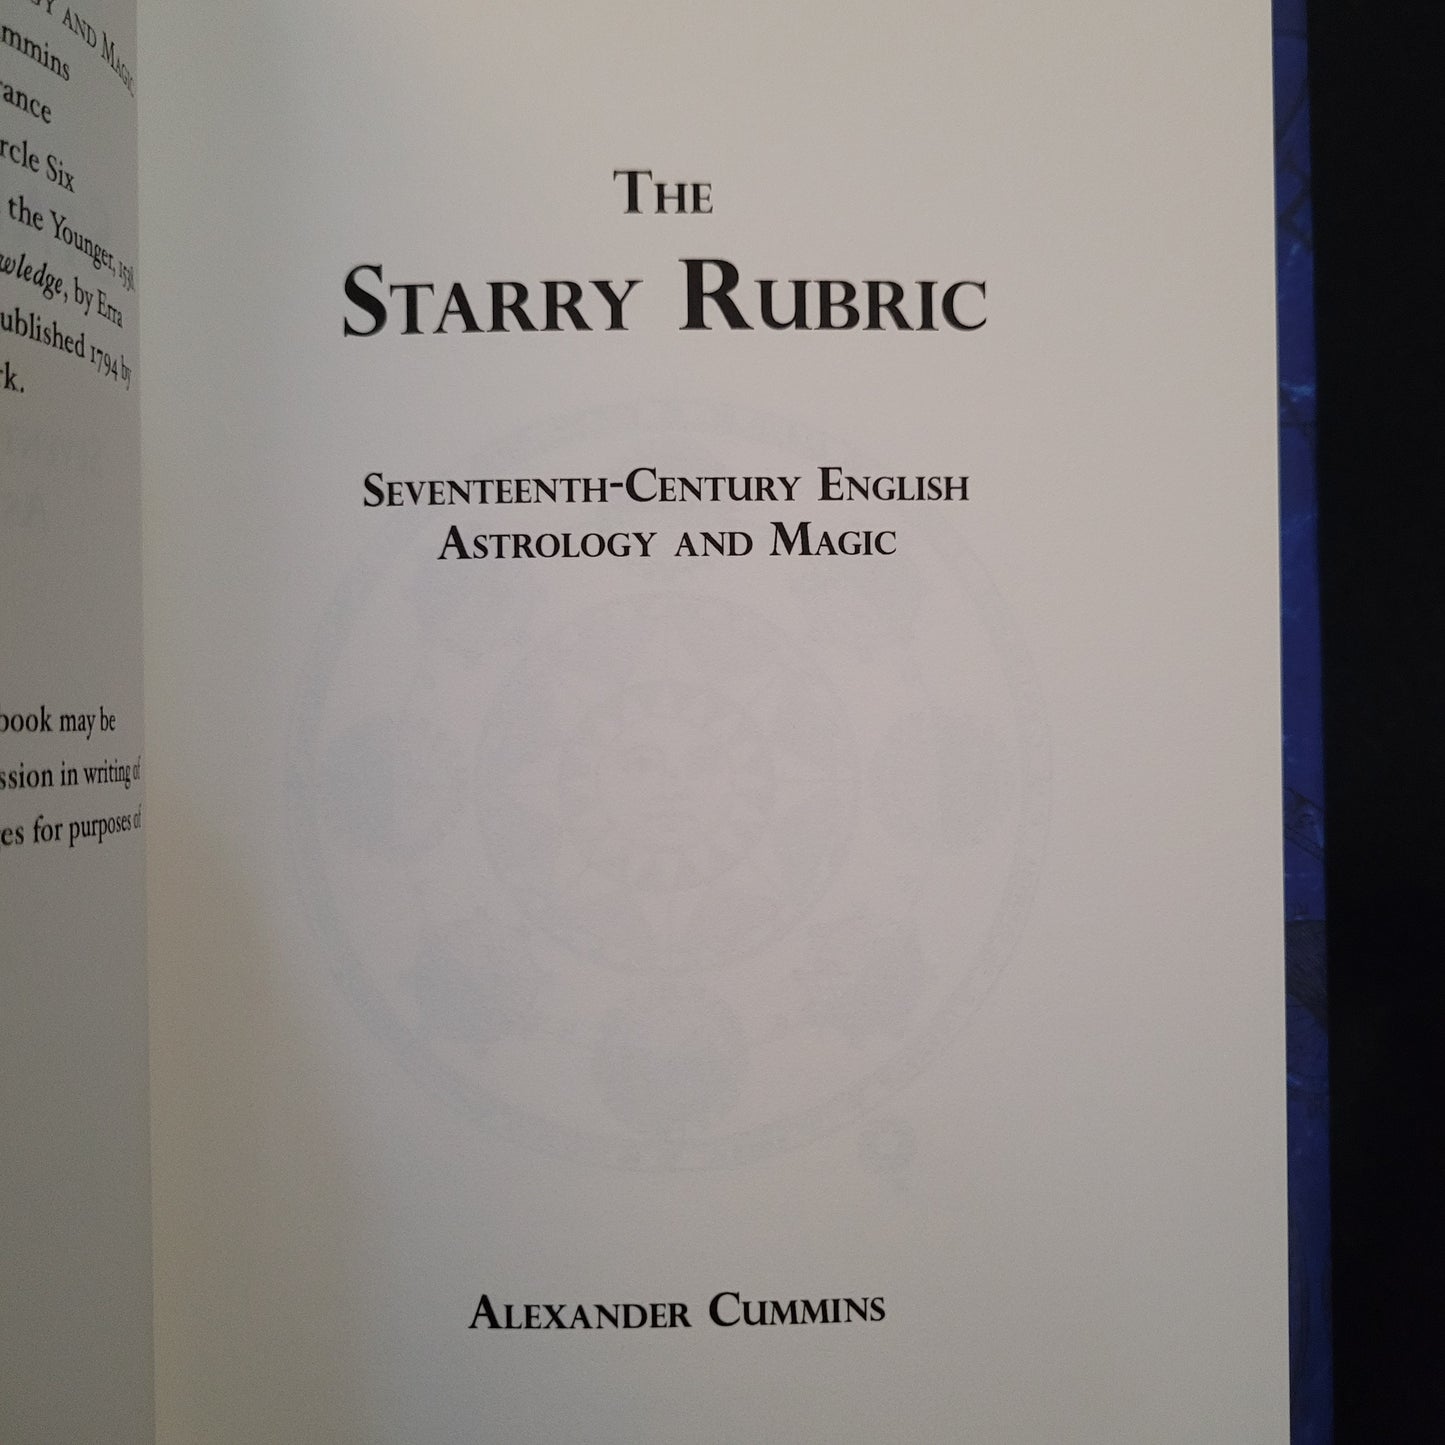 The Starry Rubric: Seventeenth-Century English Astrology and Magic by Alexander Cummins (Hadean Press, 2012) Hardcover